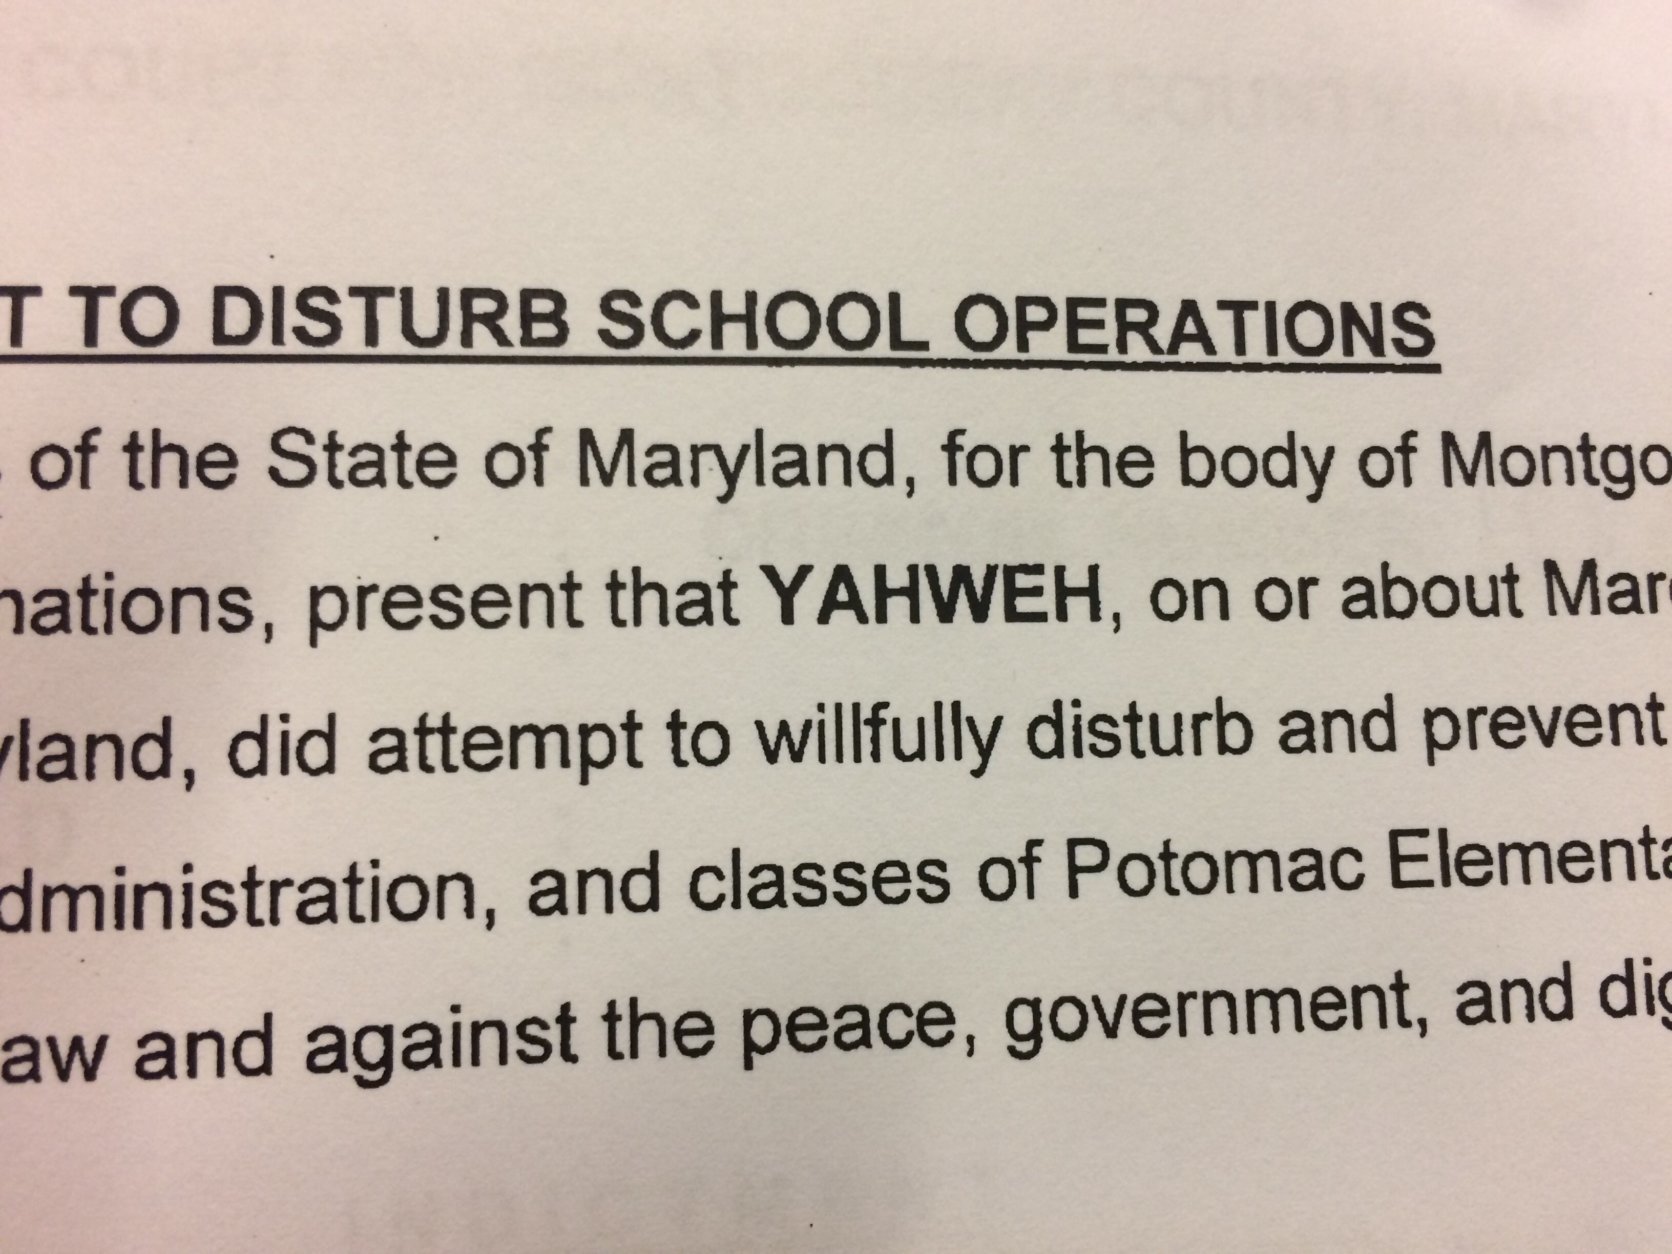 Virgil McDonald, who had his name legally changed to "Yahweh," was indicted on charges including attempting to threaten mass violence and disturb school operations.